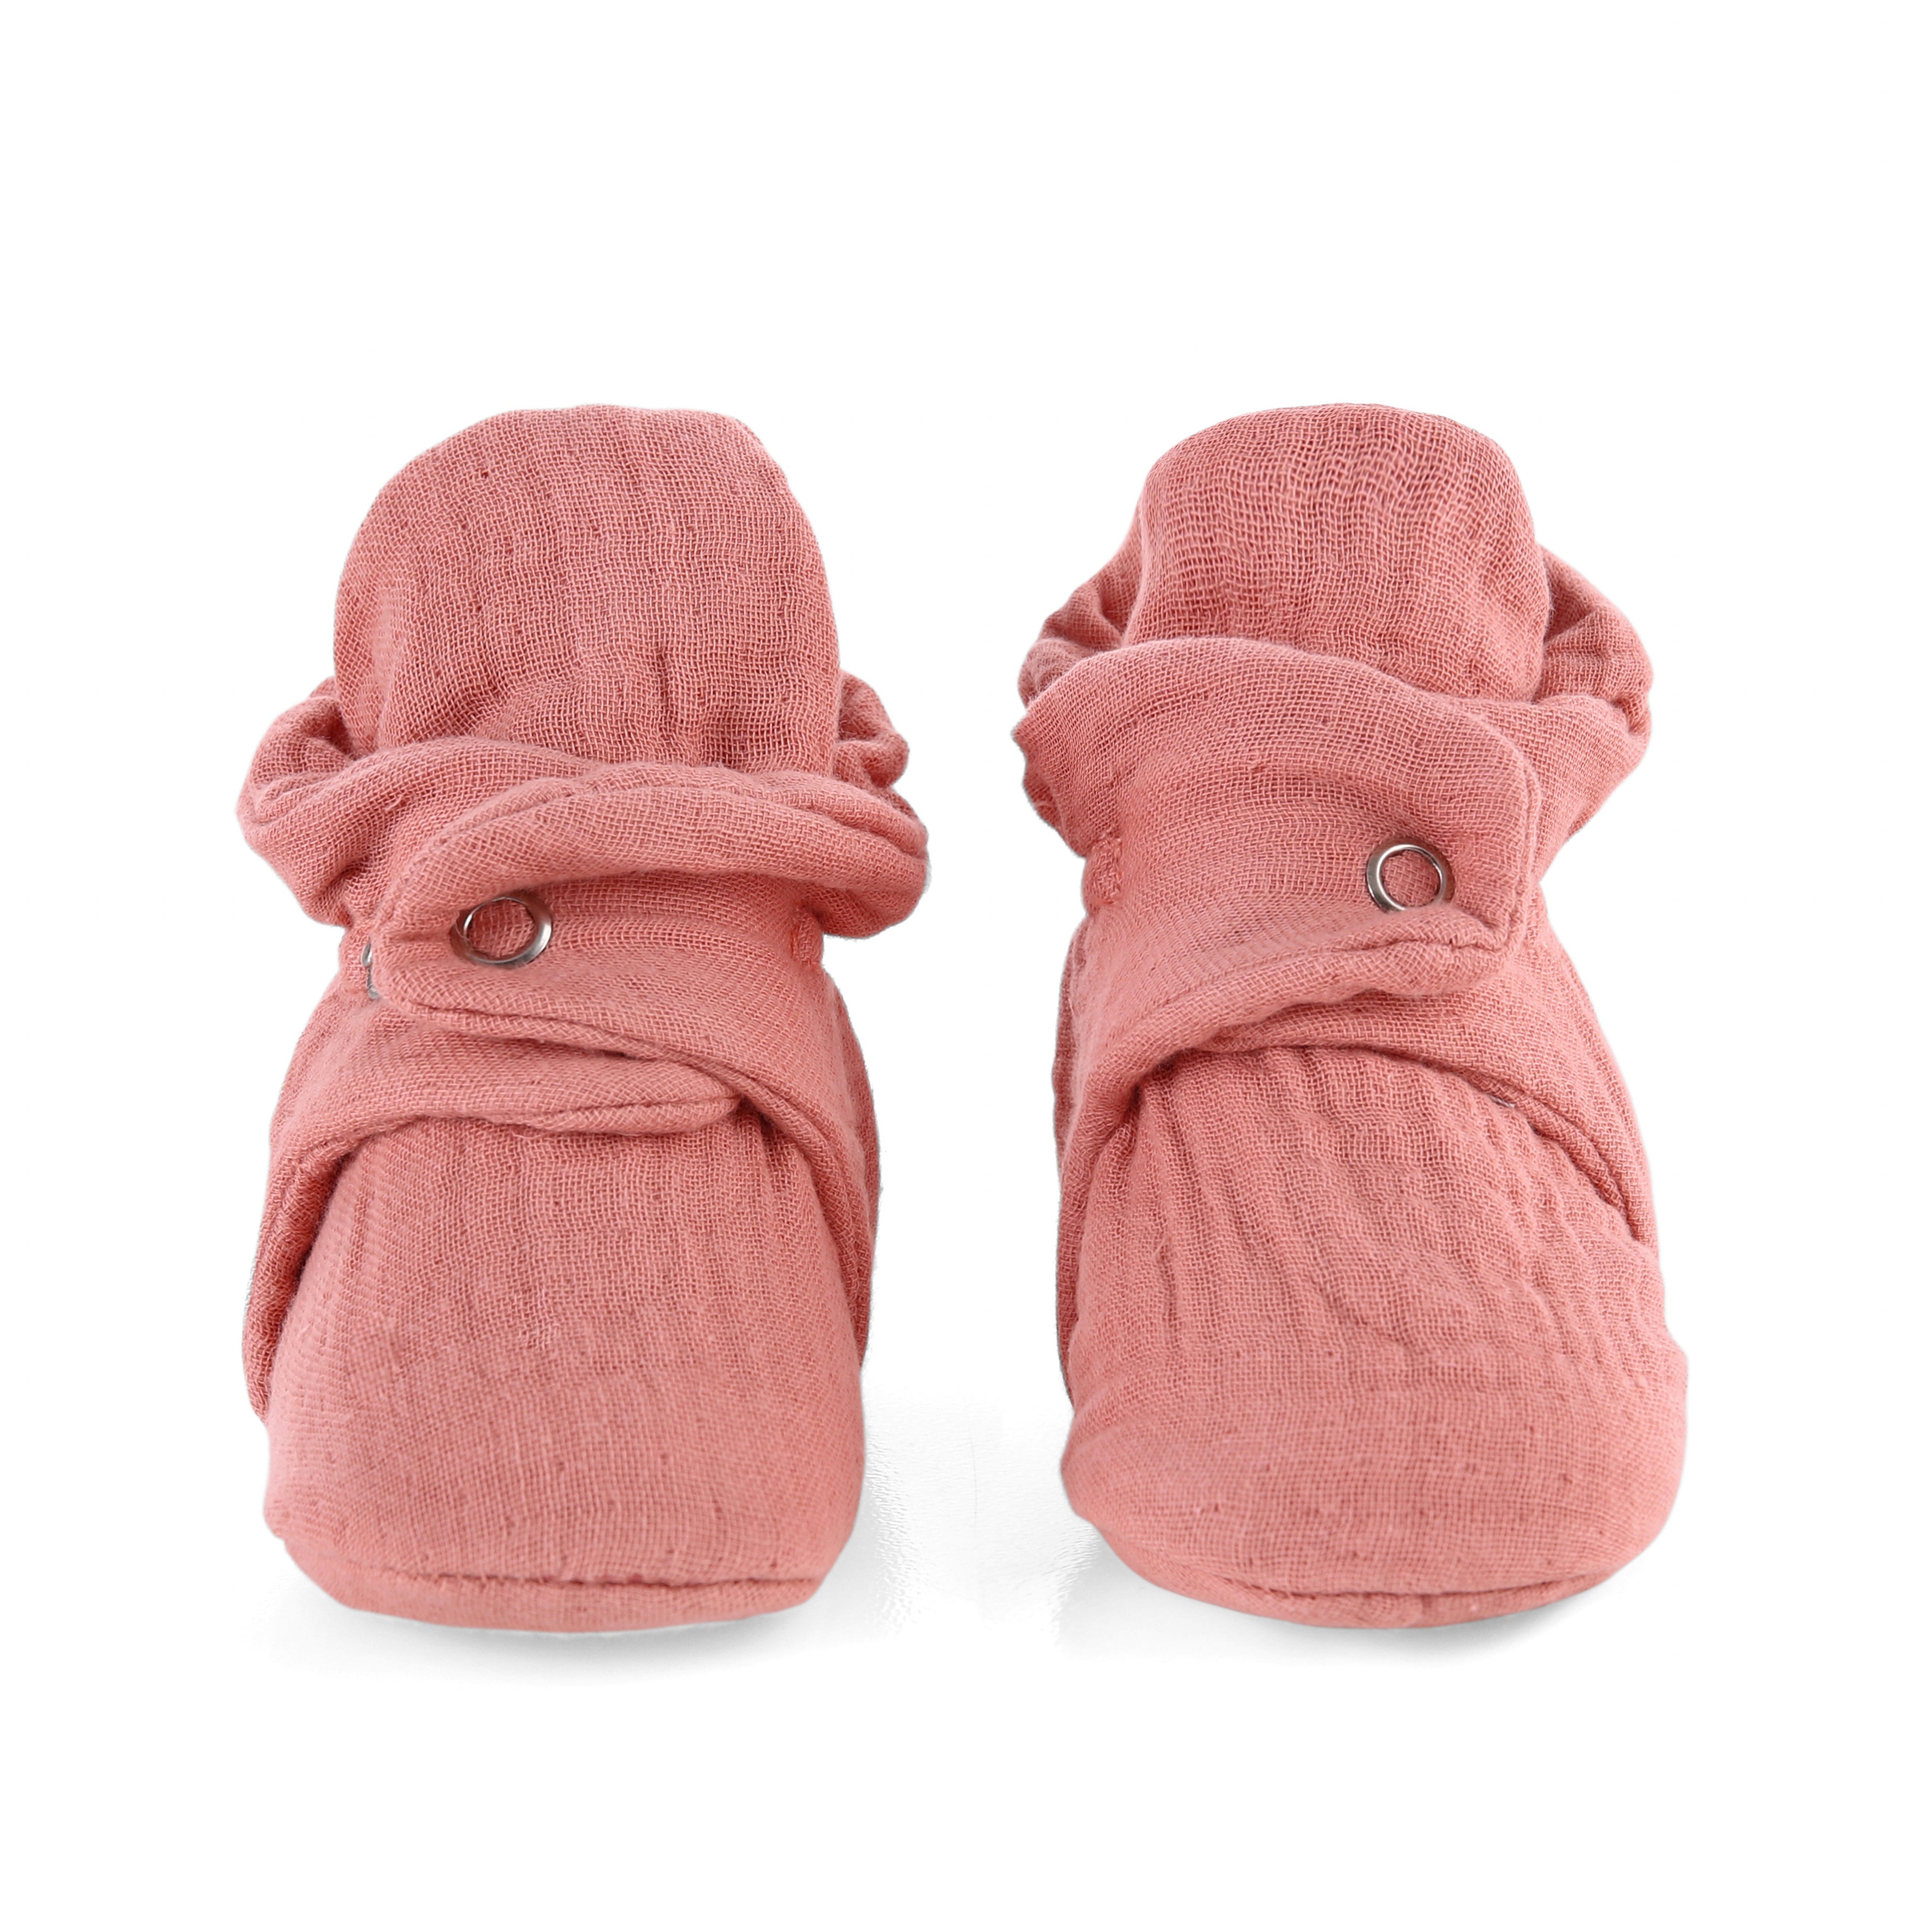 MAKIE - Organic Cotton Baby Pillow & Booties - Dream Pillow and Booties  (Sold individually)